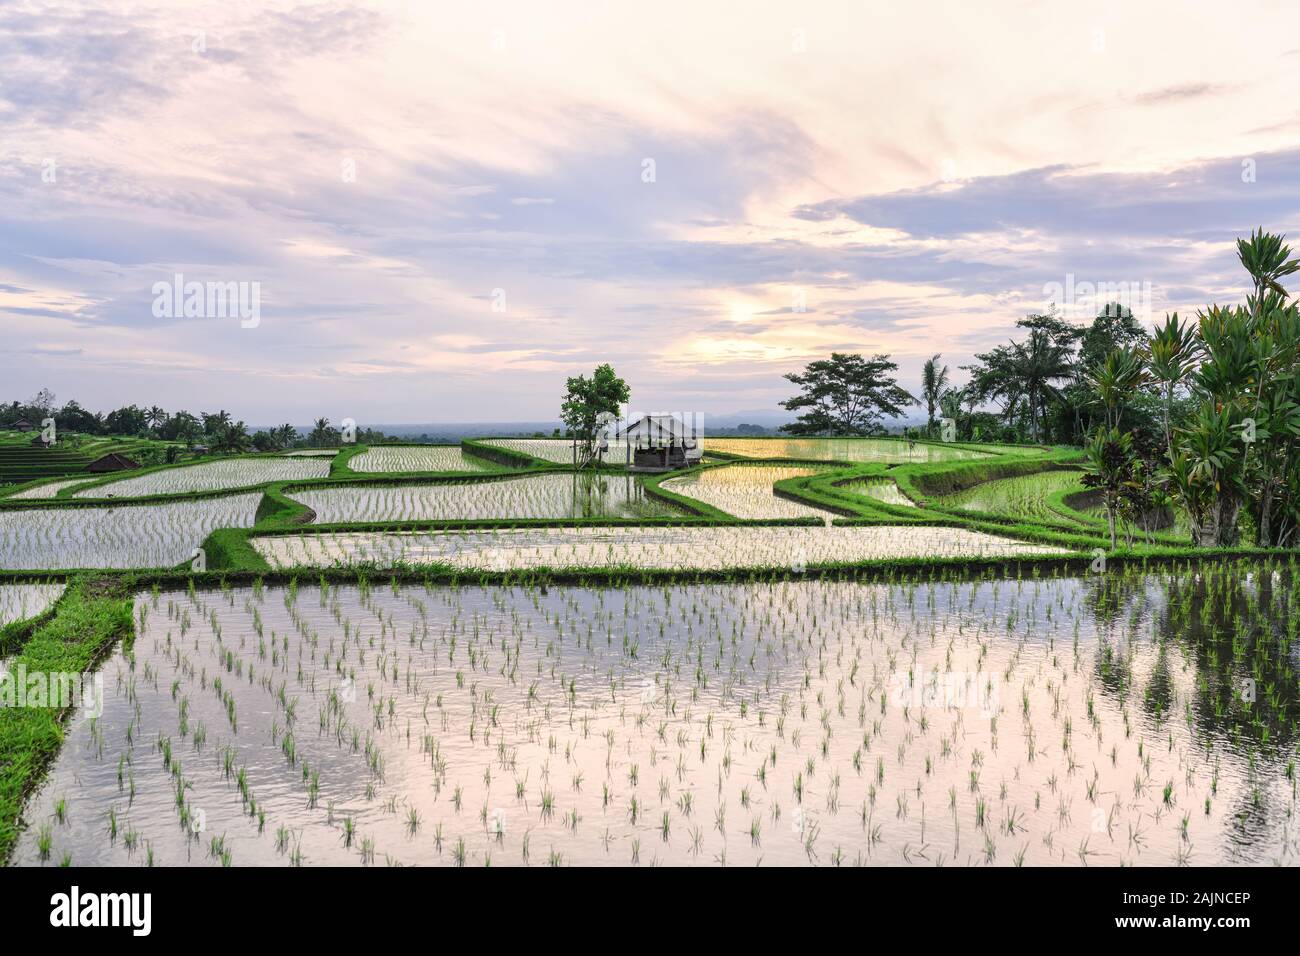 (Selective focus) Stunning view of the Jatiluwih rice terrace fields with a farmer hut's. Jatiluwih rice fields are a series of rice paddies located i Stock Photo